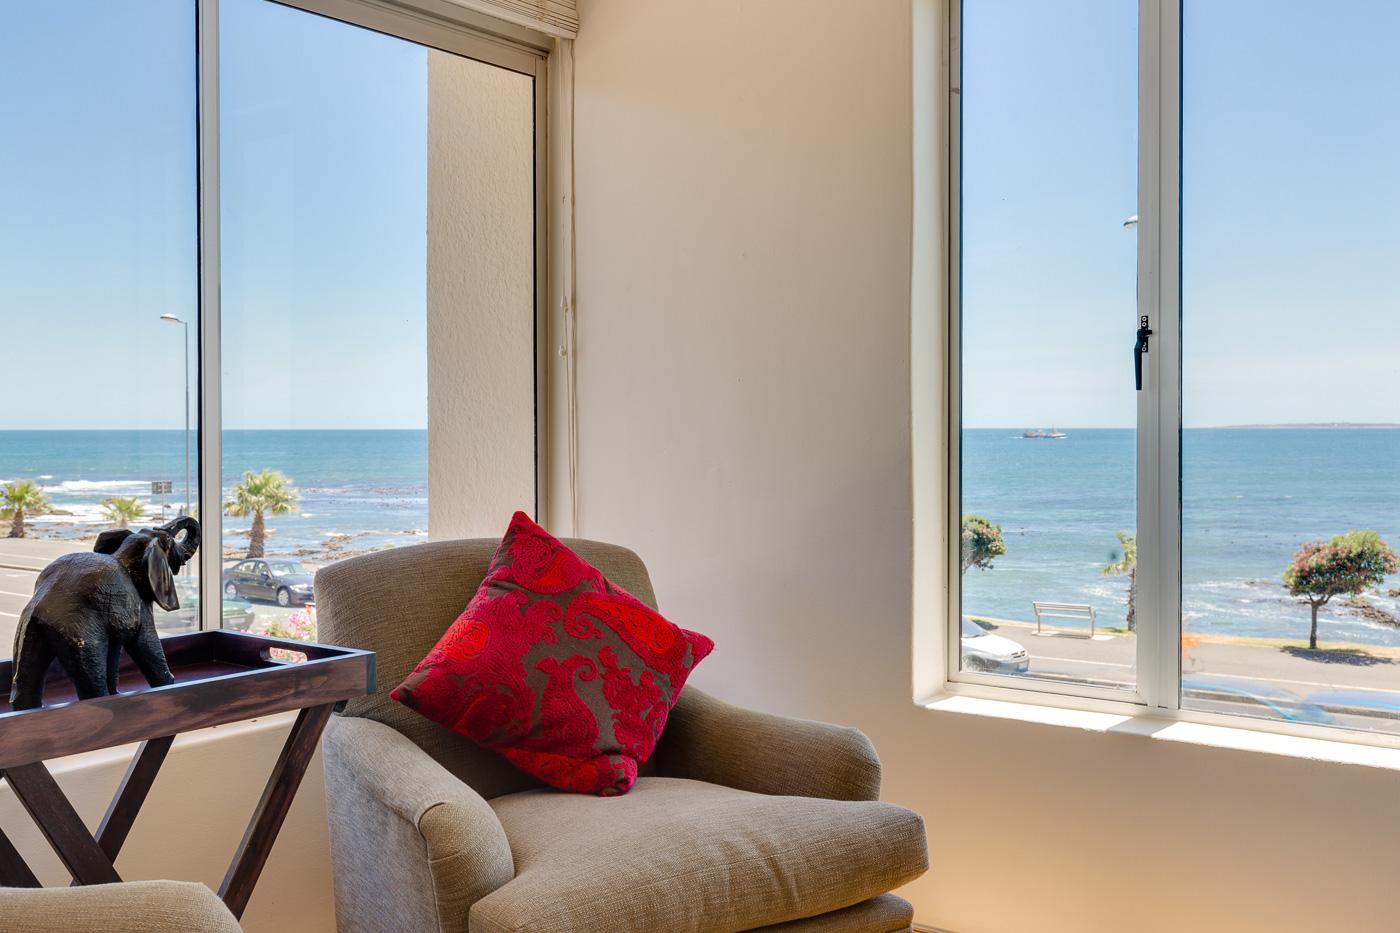 Photo 4 of Apartment Marina accommodation in Mouille Point, Cape Town with 2 bedrooms and 2 bathrooms